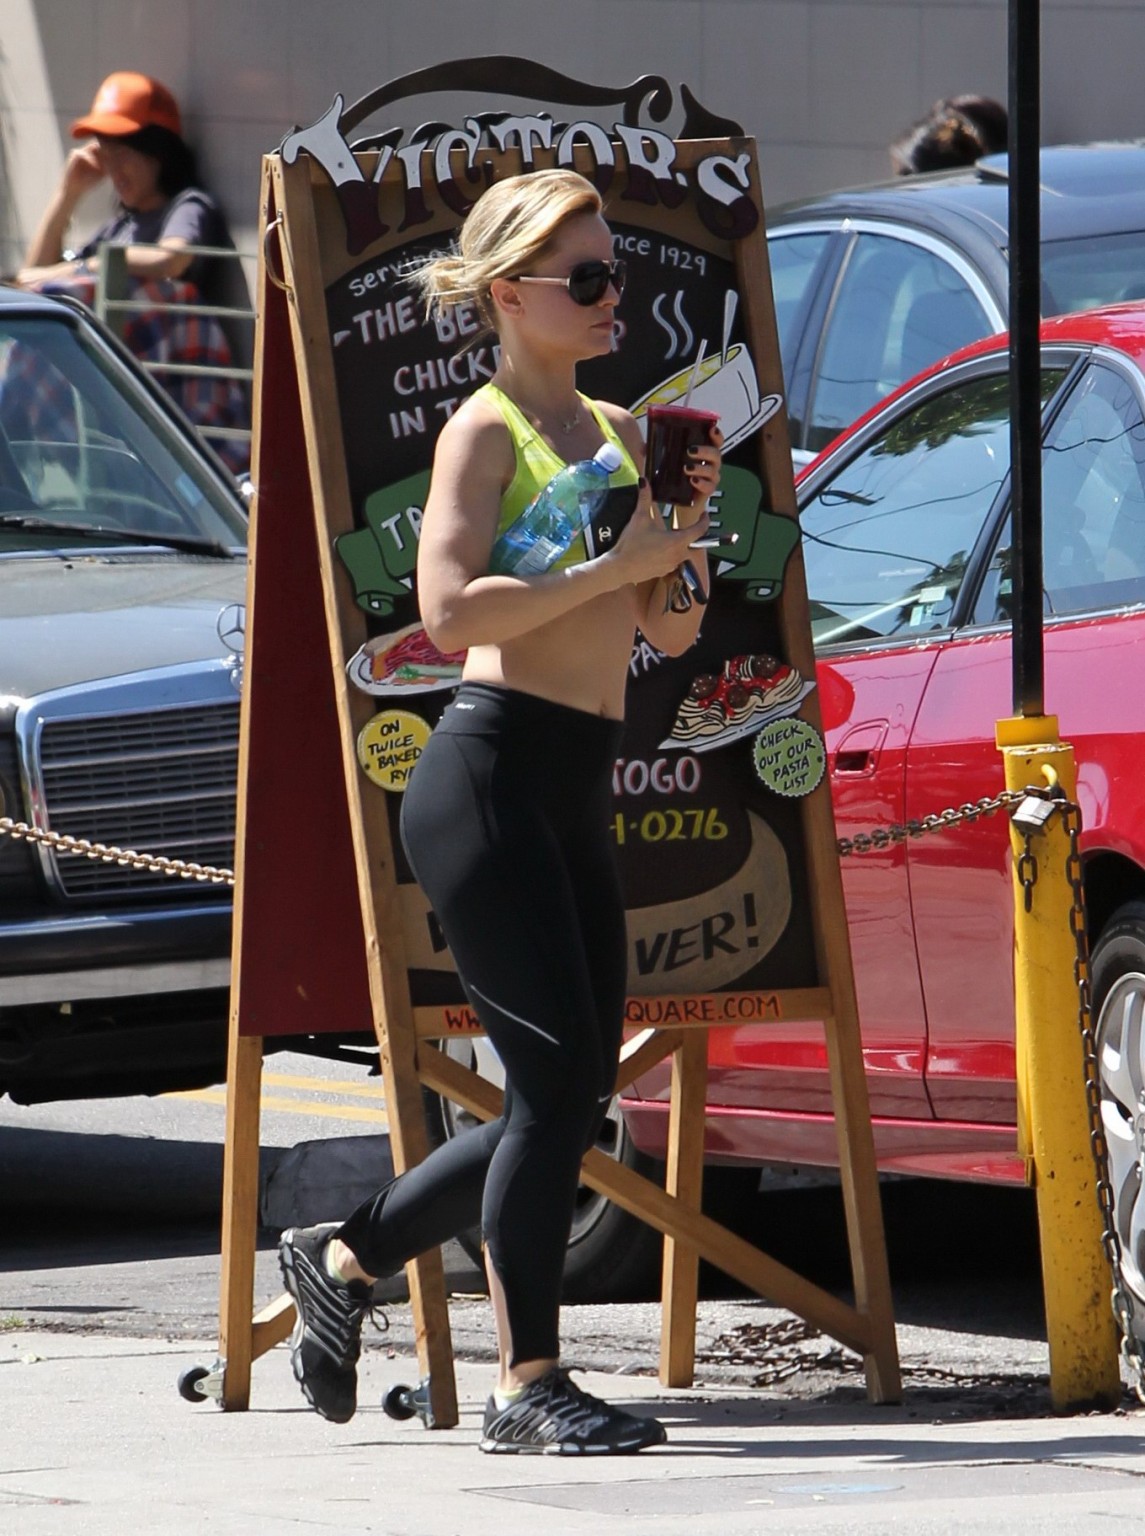 Mena Suvari shows off her ass in tights while jogging in Hollywood